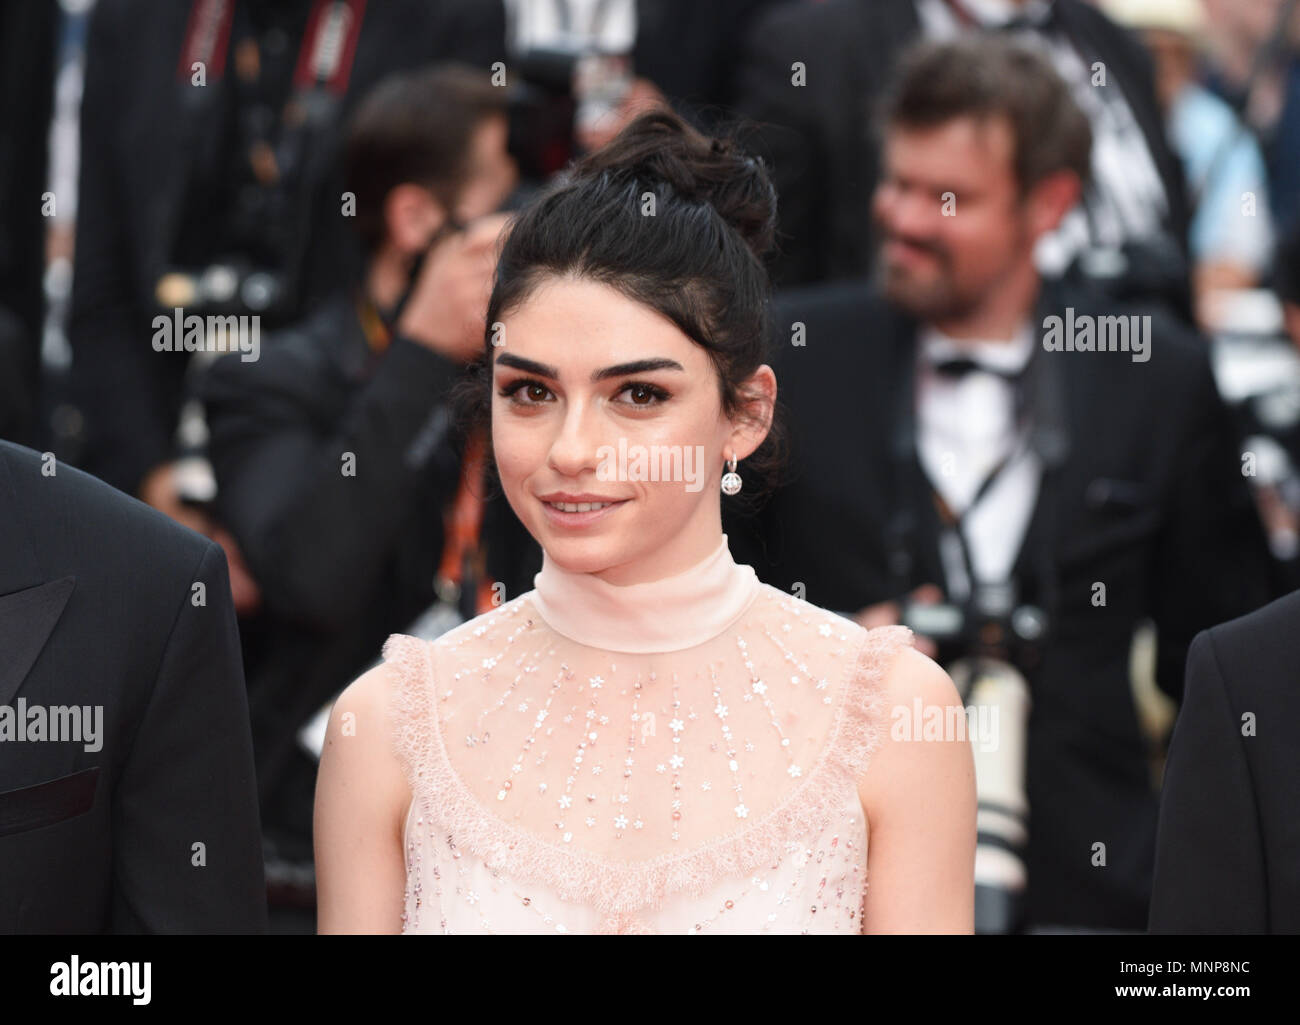 Cannes, France. 18th May, 2018. Hazar Erguclu attends the 'Ahlat Agaci' premiere during the 71st Cannes film festival. Credit: Idealink Photography/Alamy Live News Stock Photo